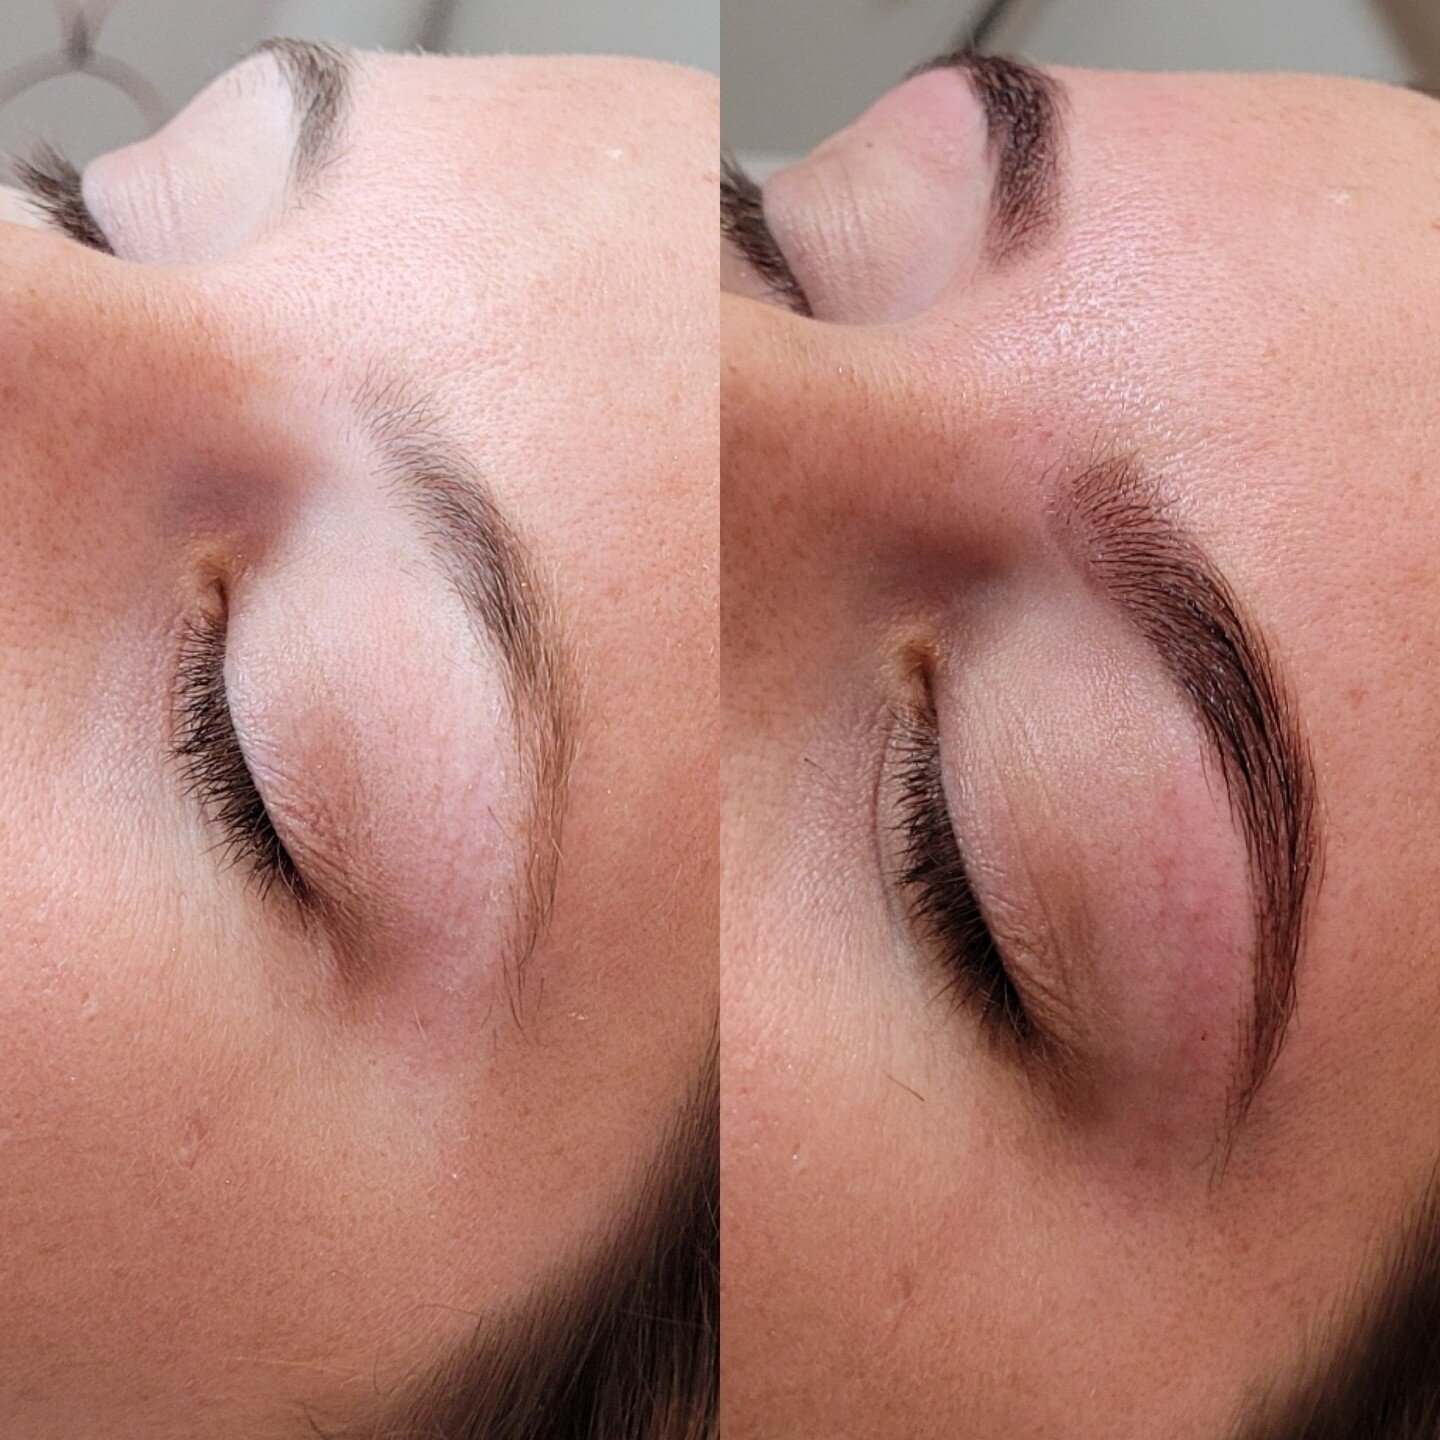 Interested in brow tattooing but not sure if it's right for you? Come and see us for henna brow mapping ✨⁠
⁠
This treatment created a similar effect to brow tattooing but will fade within a few weeks. It's a great way to get used to bolder brows and 